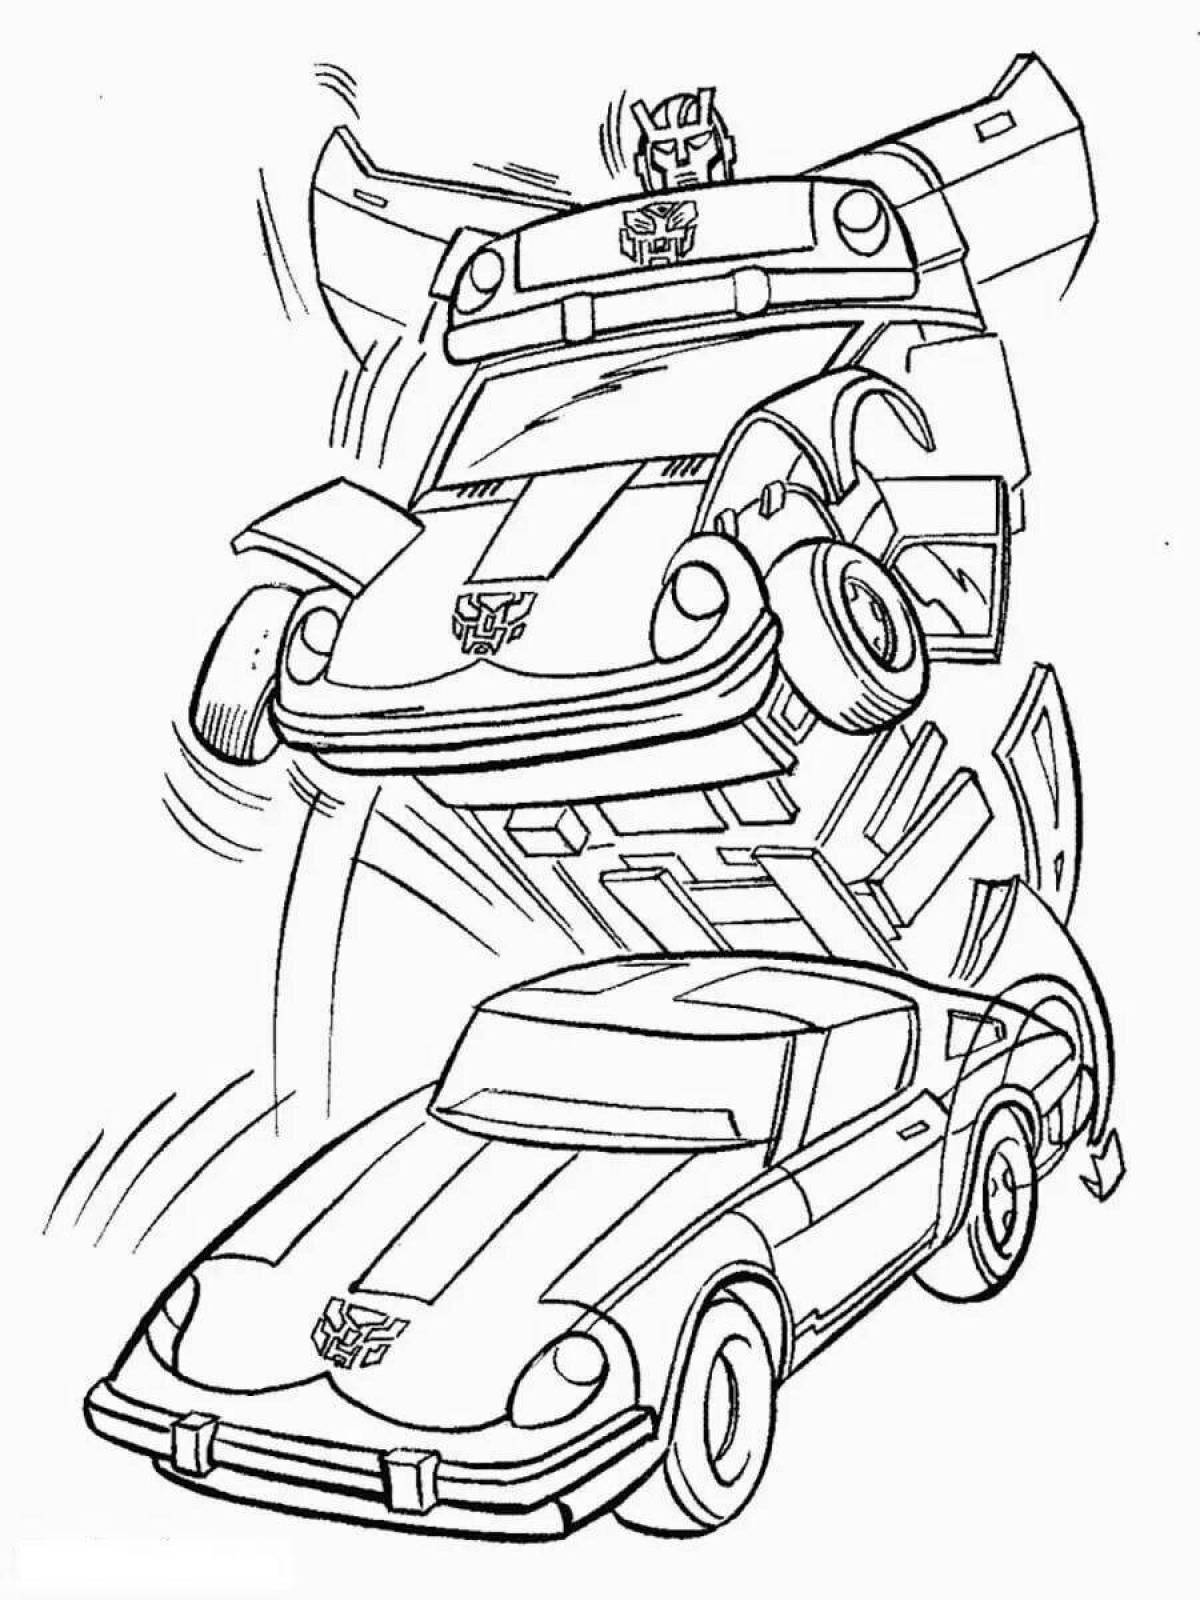 Colorful transforming car coloring page